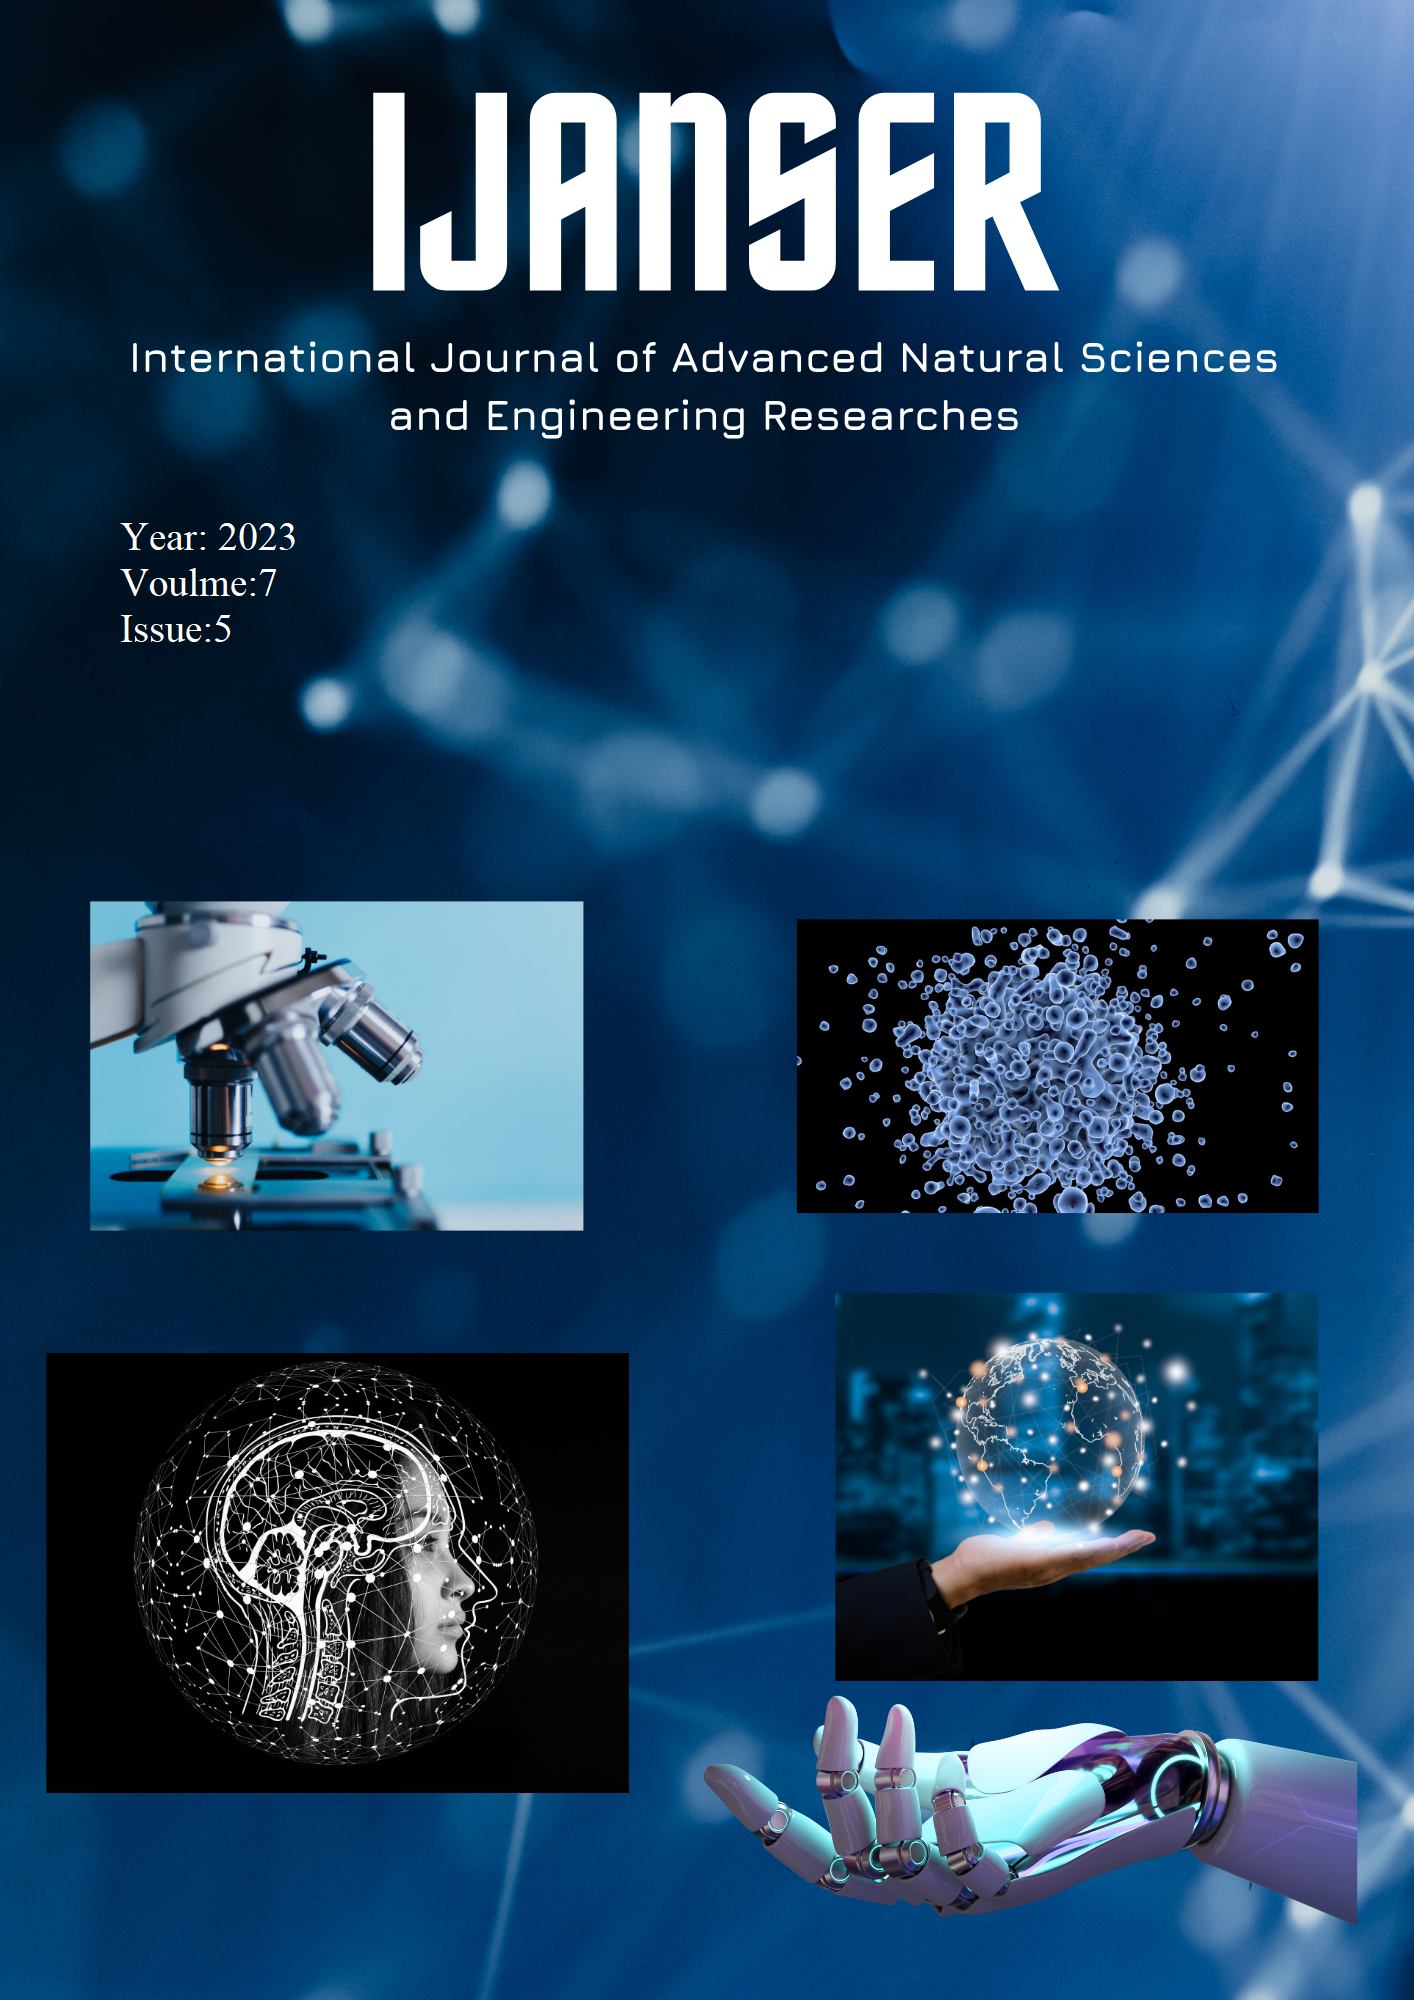                     View Vol. 7 No. 5 (2023): IJANSER (ICPIS 2023 SPECIAL ISSUE)
                